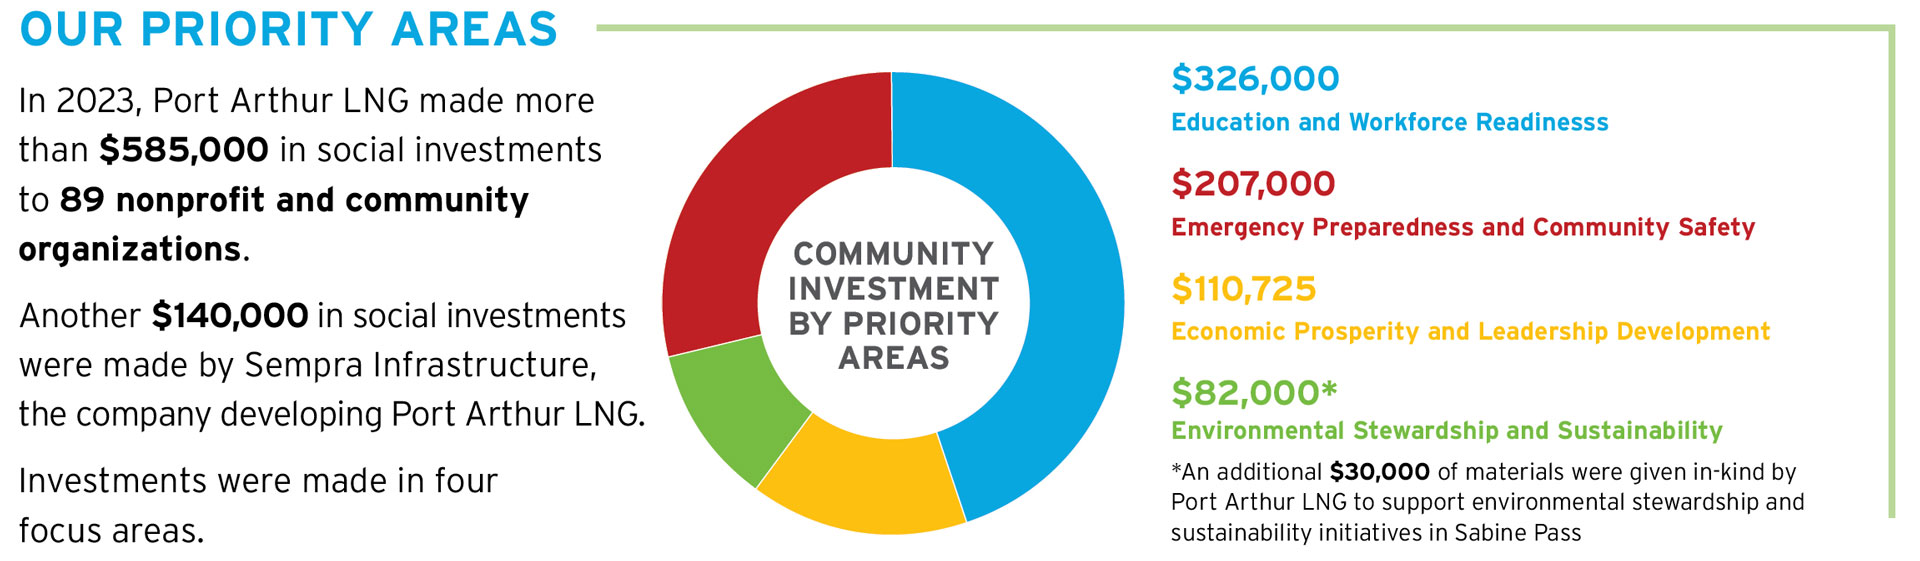 Community Investment by Priority Areas